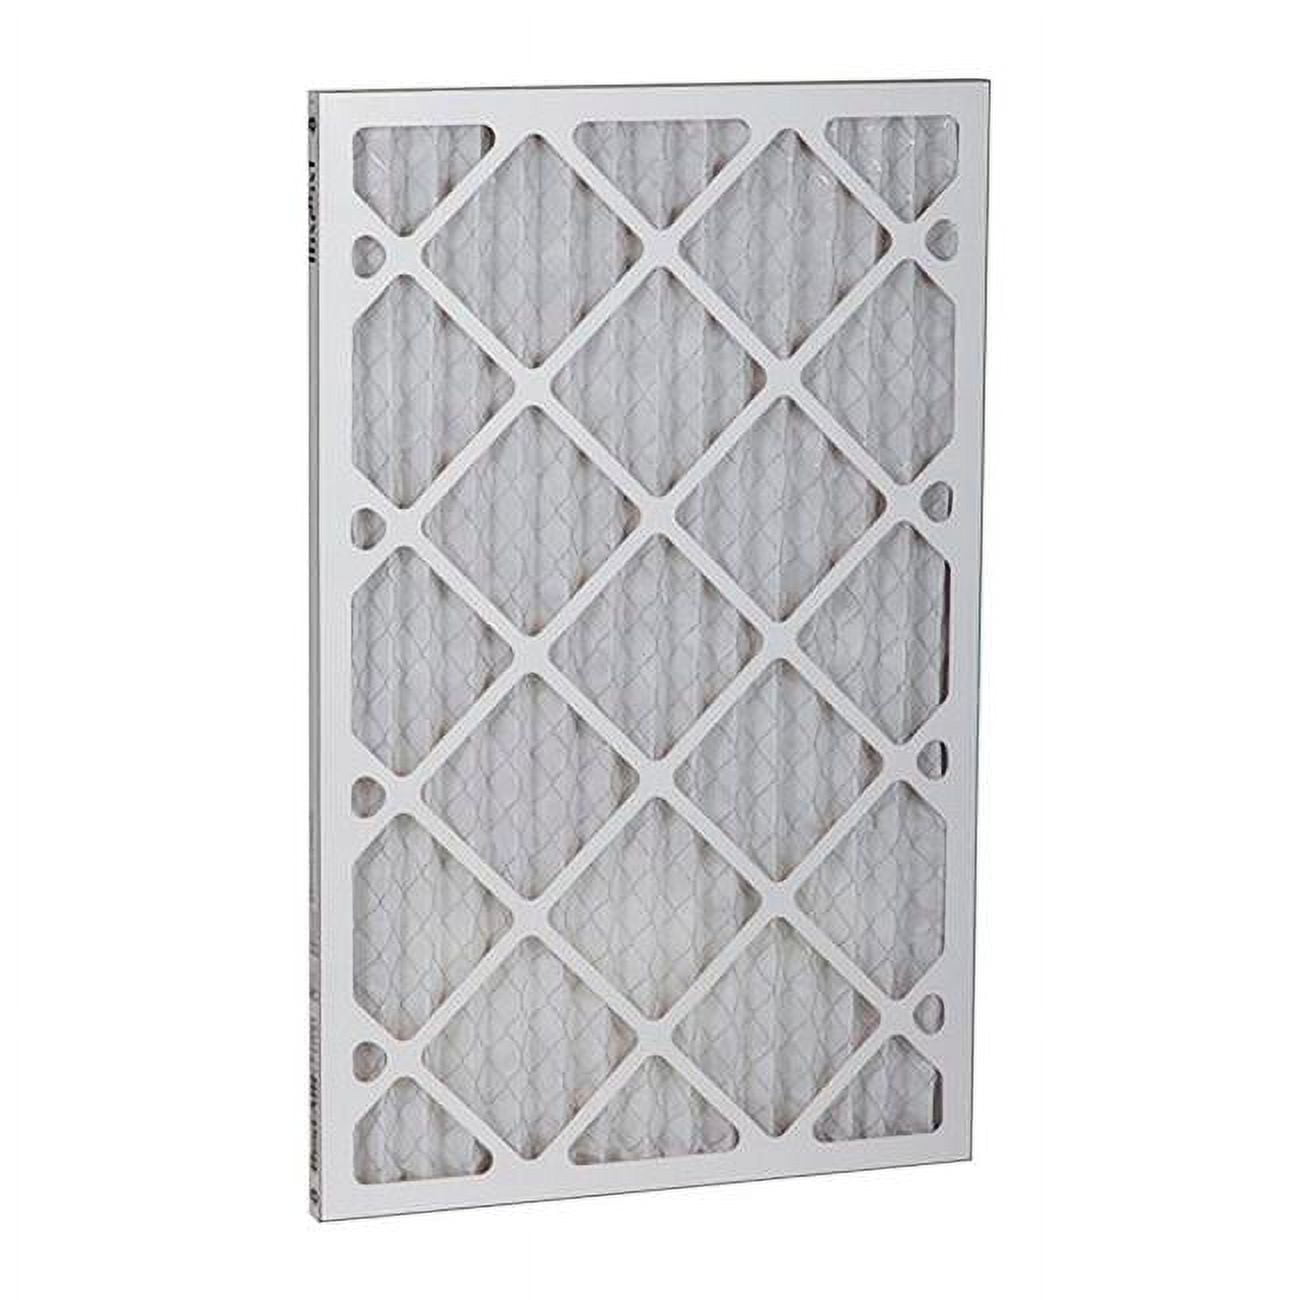 Picture of Bestair 4823332 25 x 20 x 1 in. 8 MERV Pleated Air Filter - Case of 12